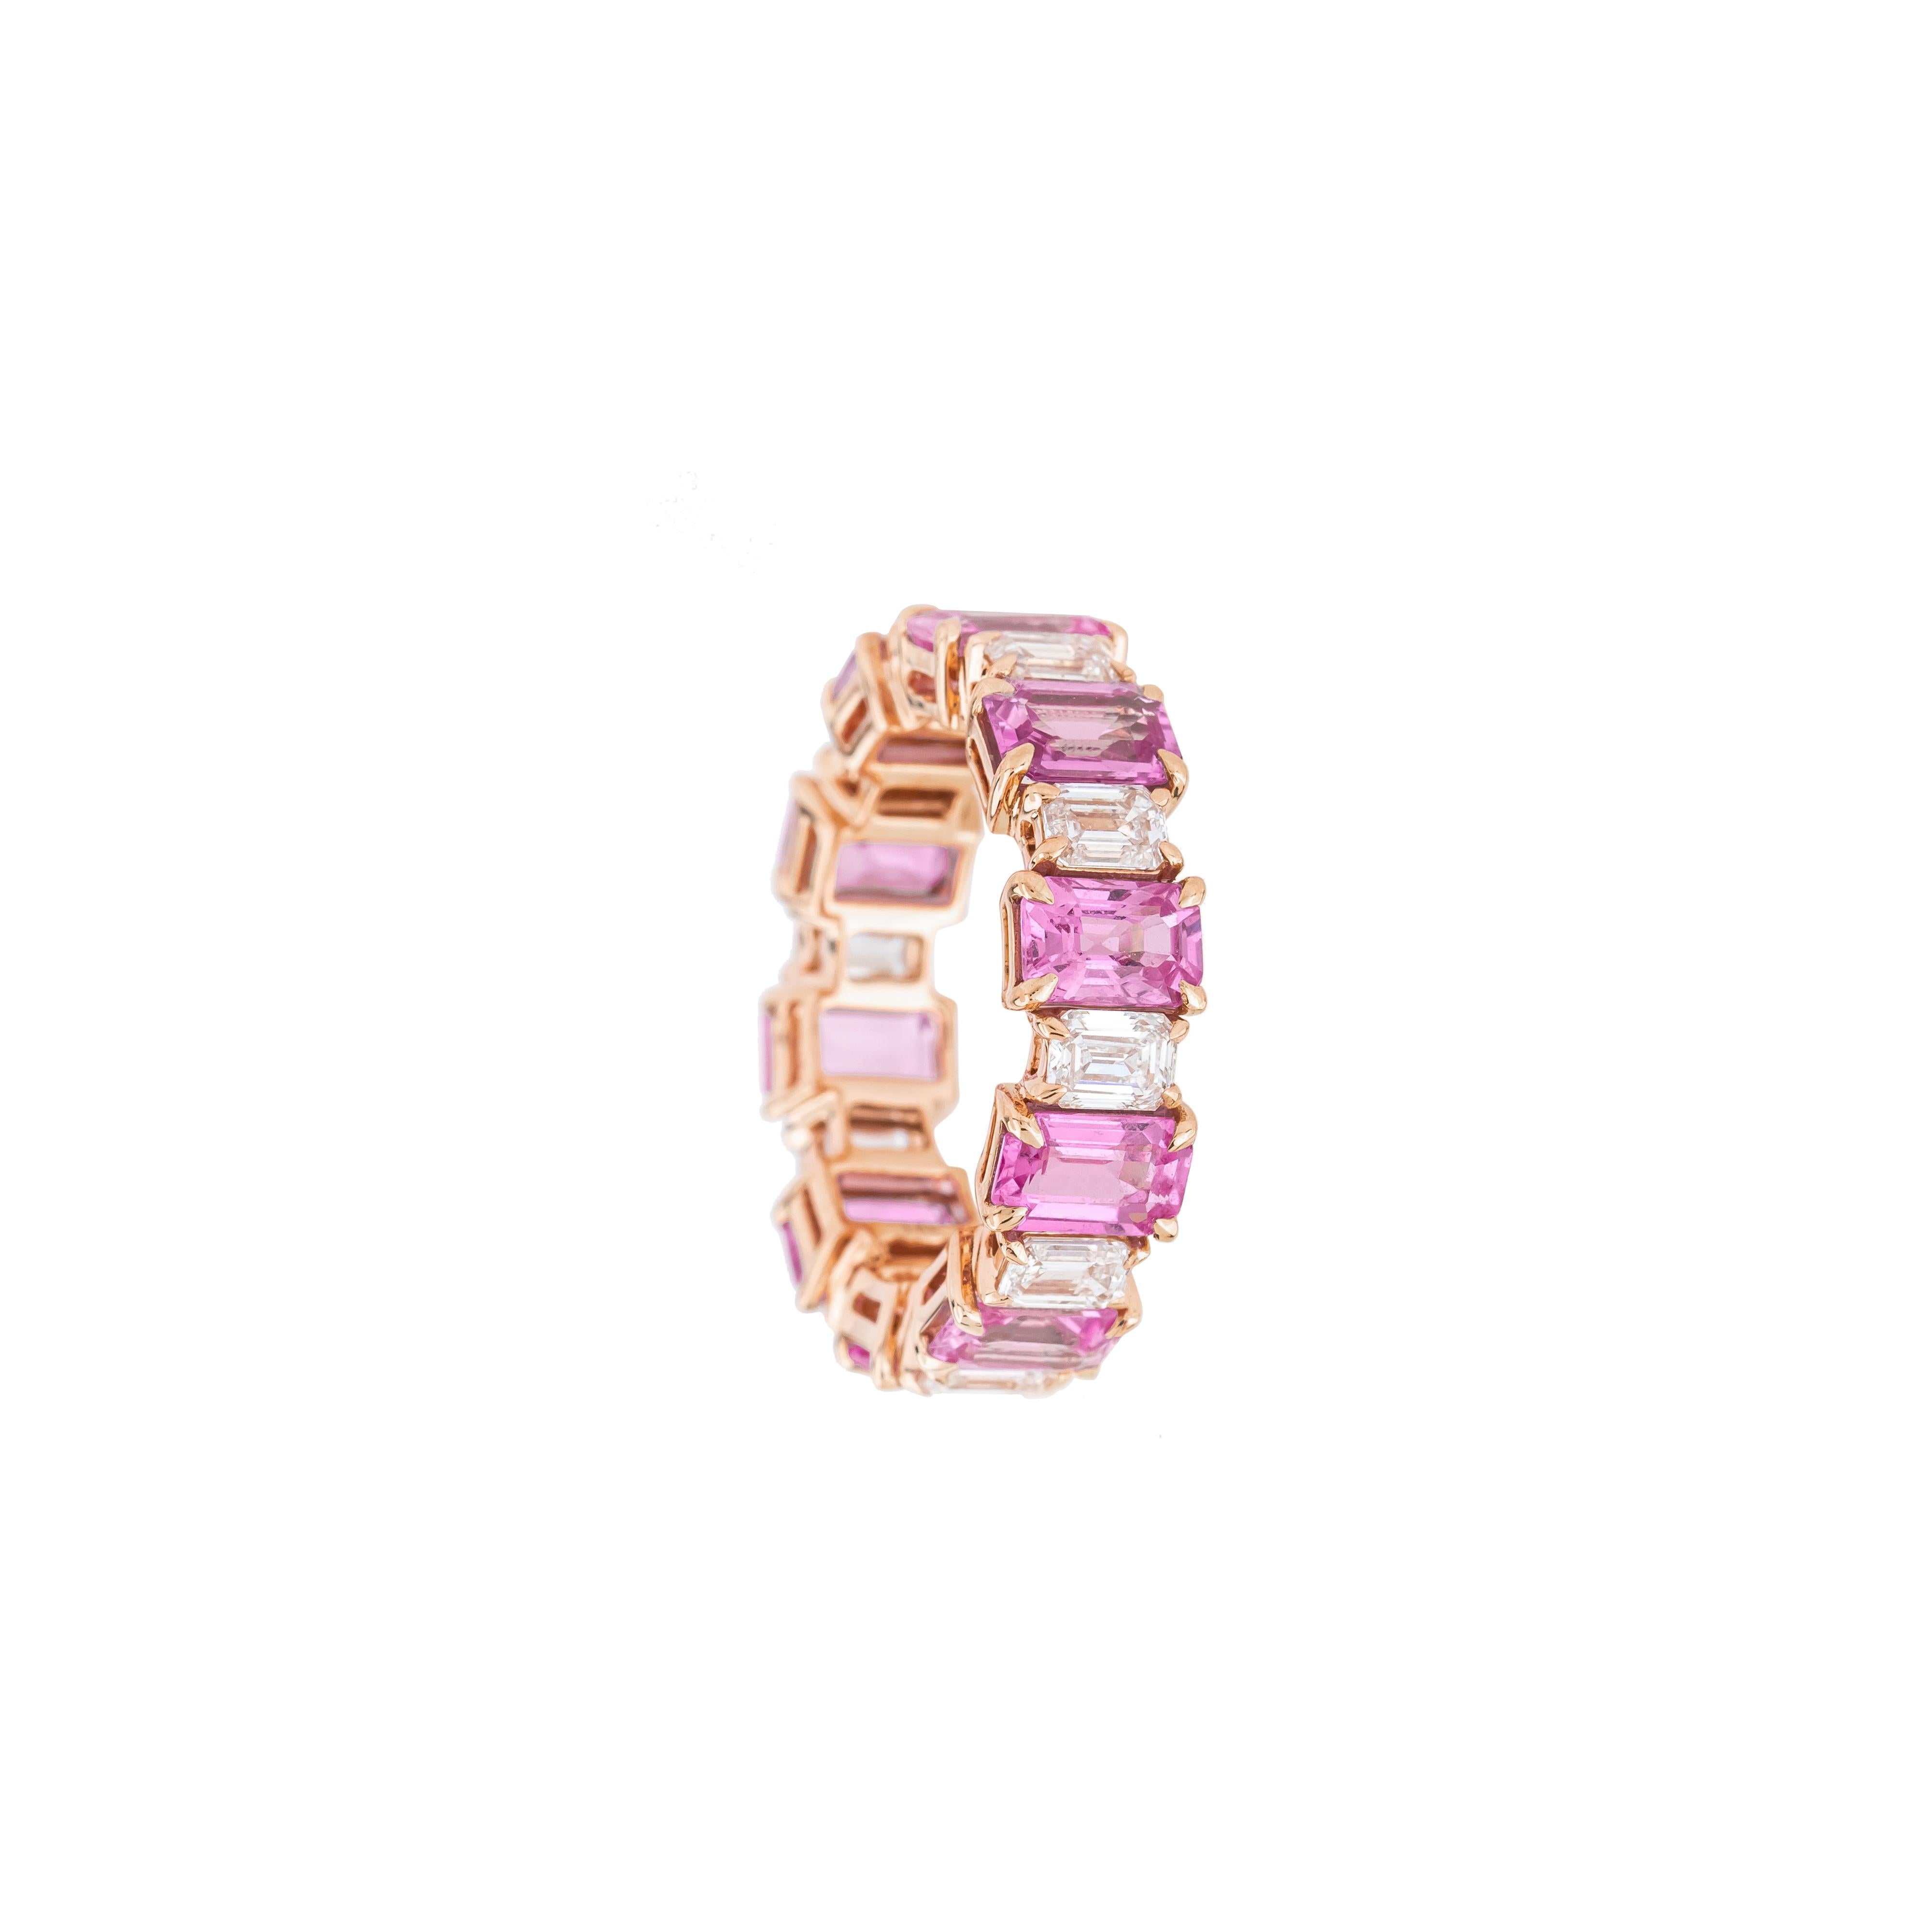 Women's 18 Karat Gold 8.81 Carat Diamond and Pink Sapphire Eternity Band Ring For Sale